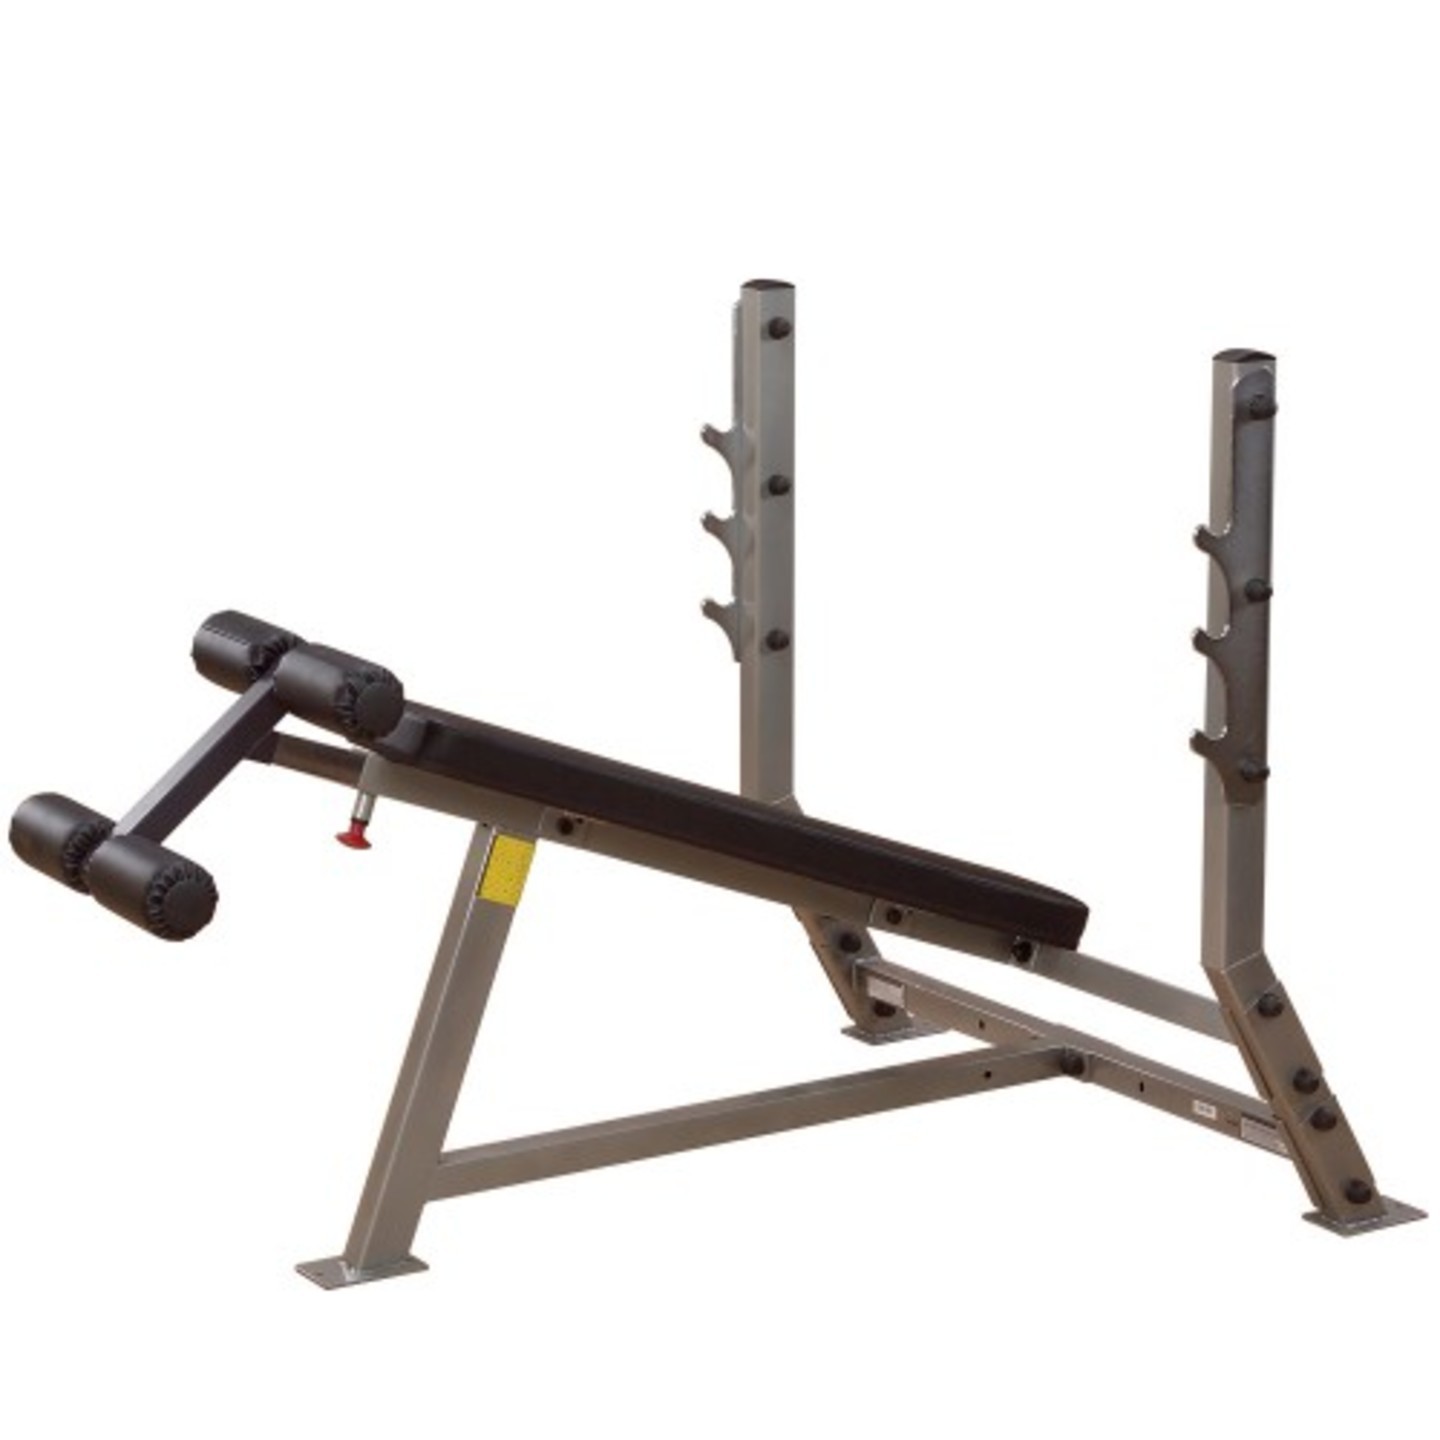 Body-Solid Full Commercial Olympic Decline Bench SDB351G